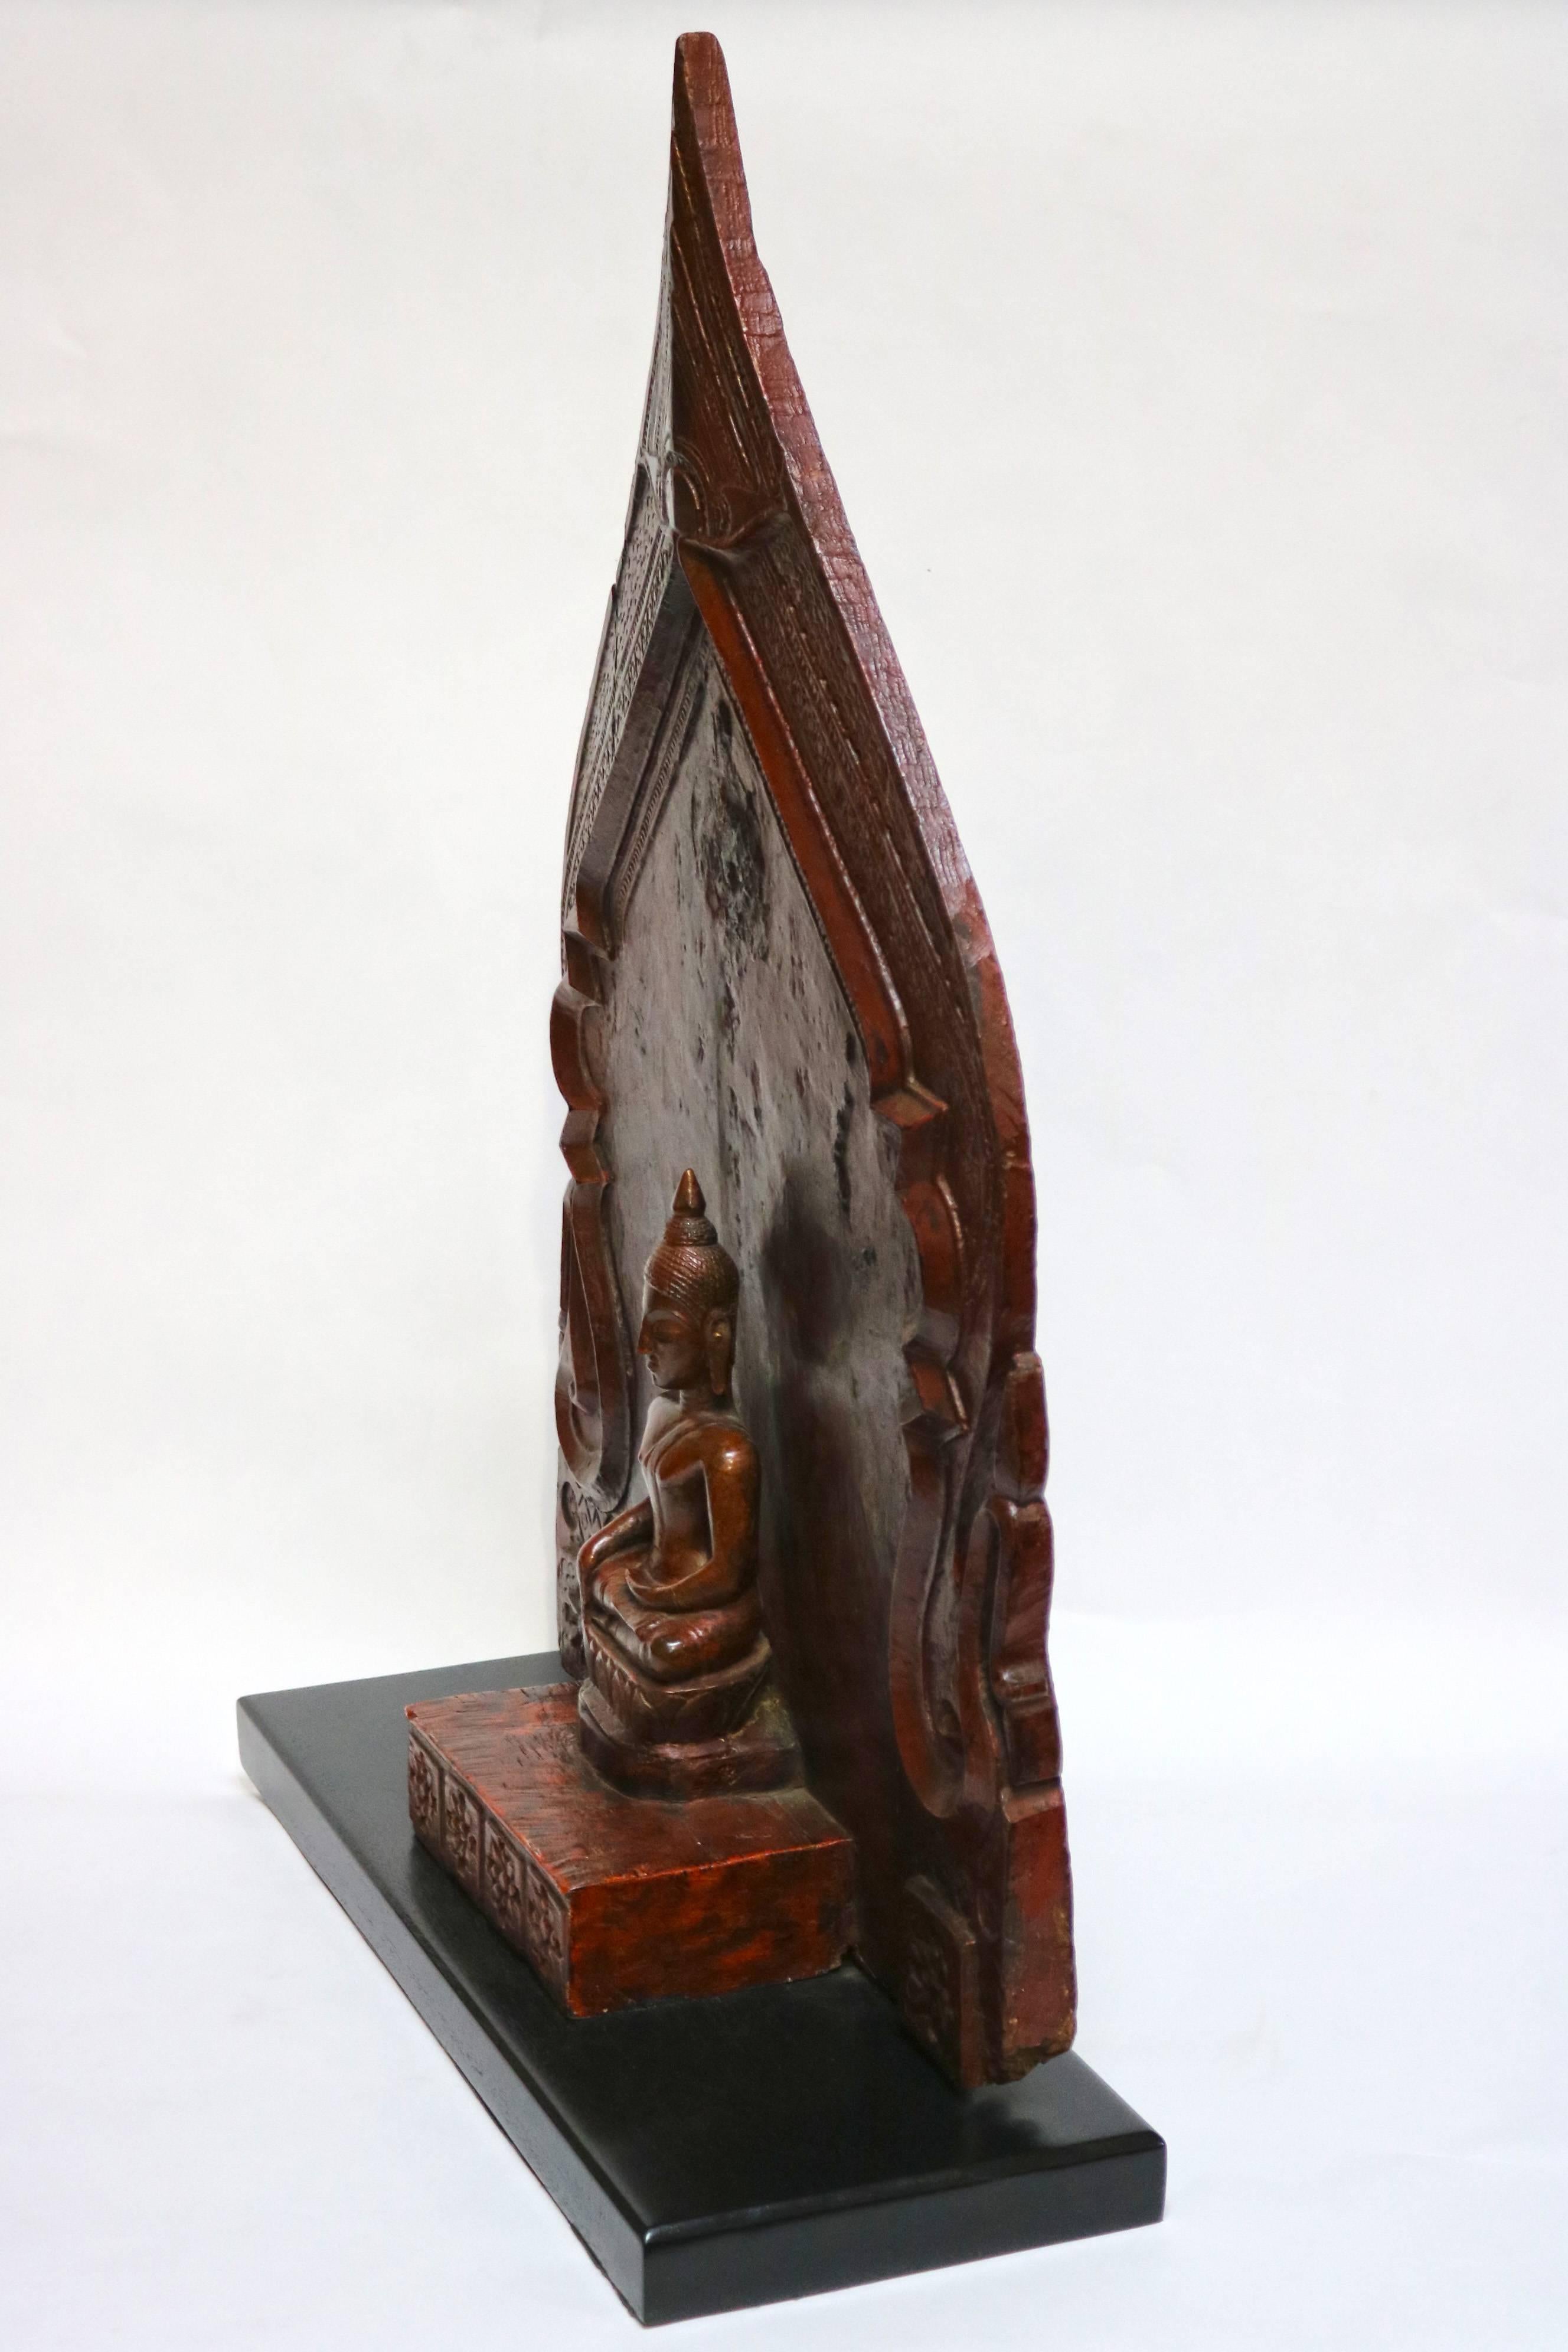 This wooden Buddha shrine was carved in 19th-century Thailand. Several layers of paint and lacquer cover the original wood, the most recent application being the red lacquer seen today. Traces of black and yellow provide evidence of the earlier